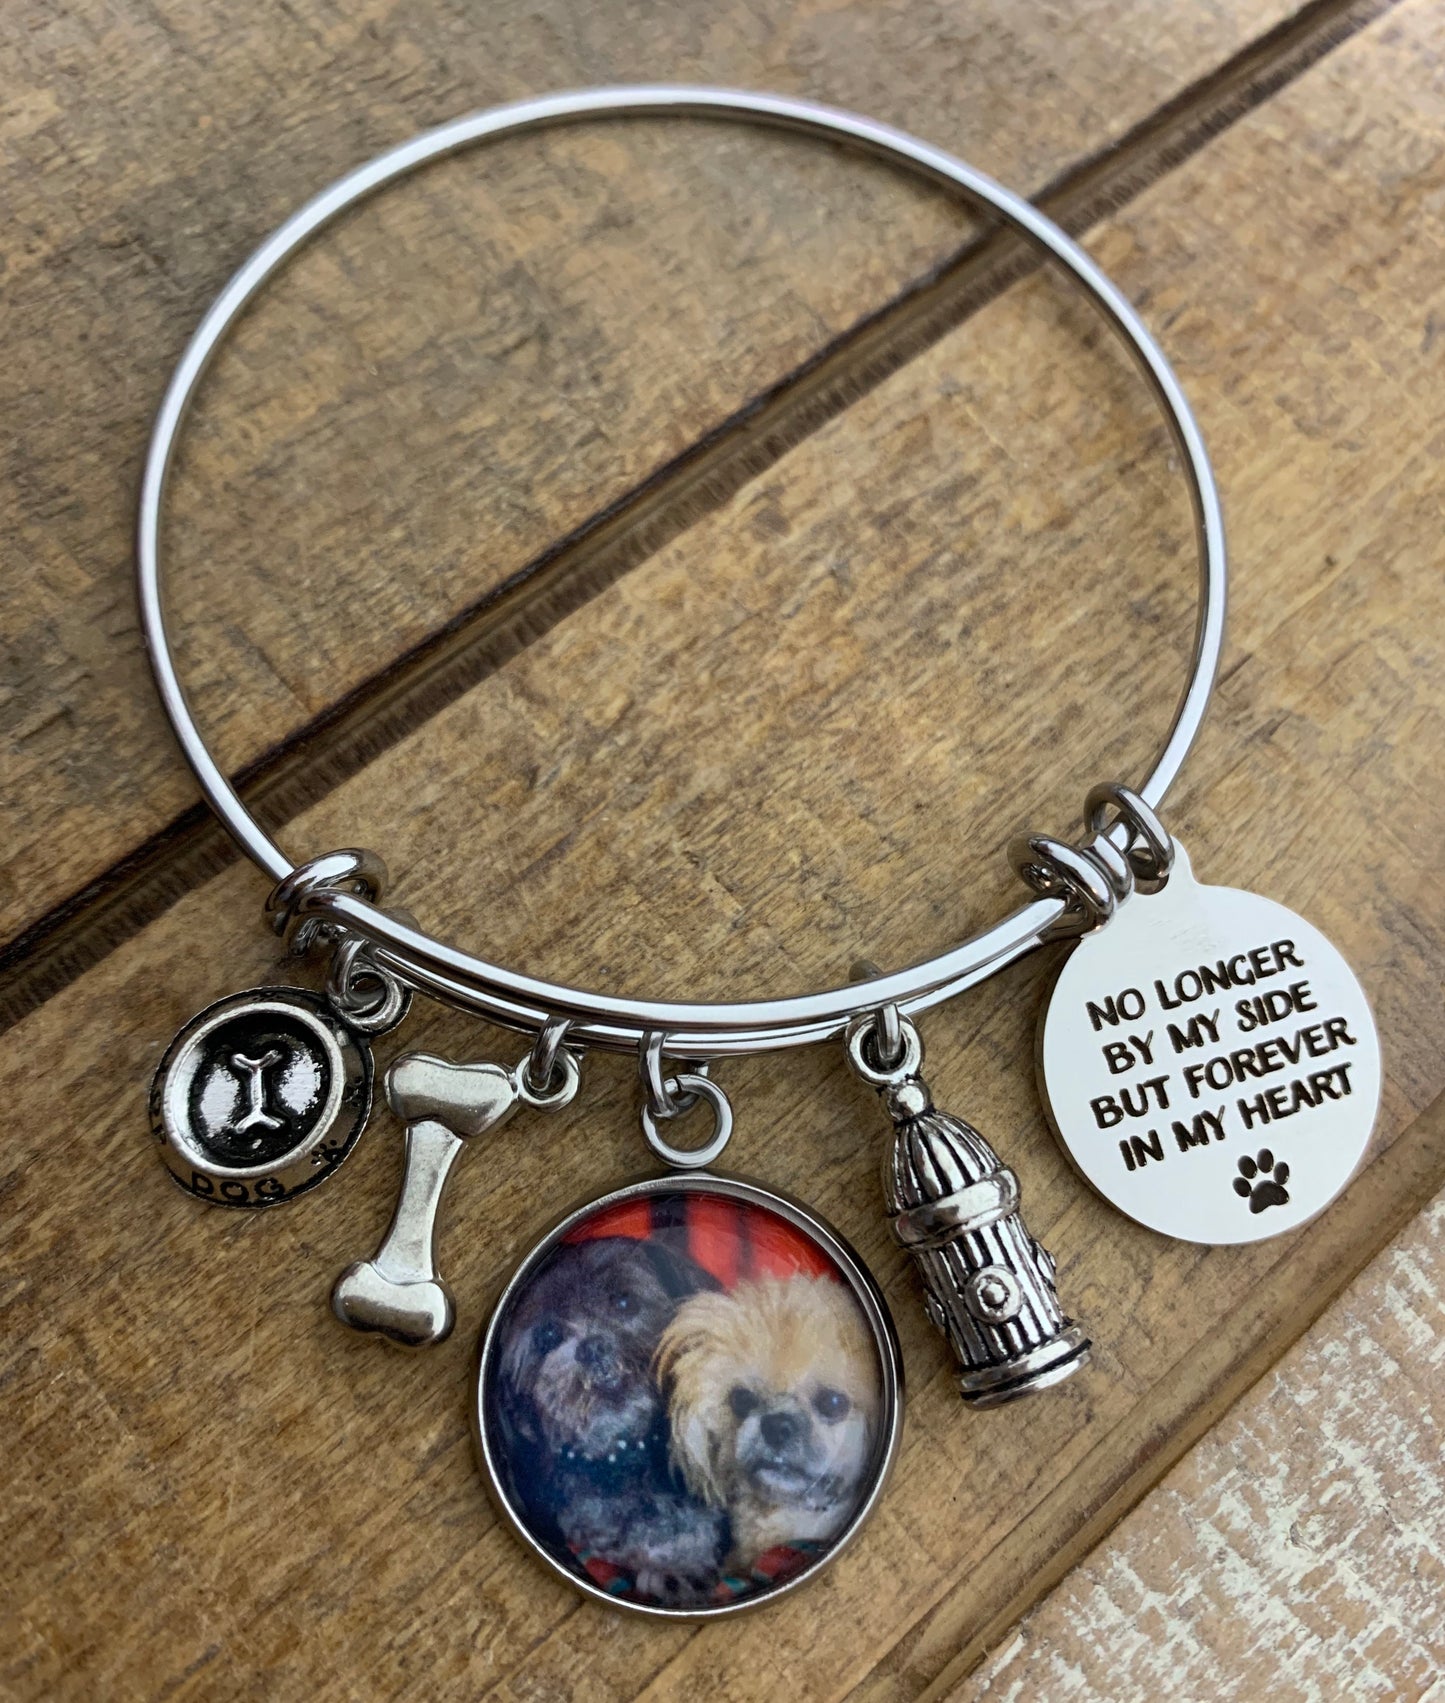 Pet Memory Bracelet- Dog or Cat Theme with Memory saying and Photo (or photo and name)